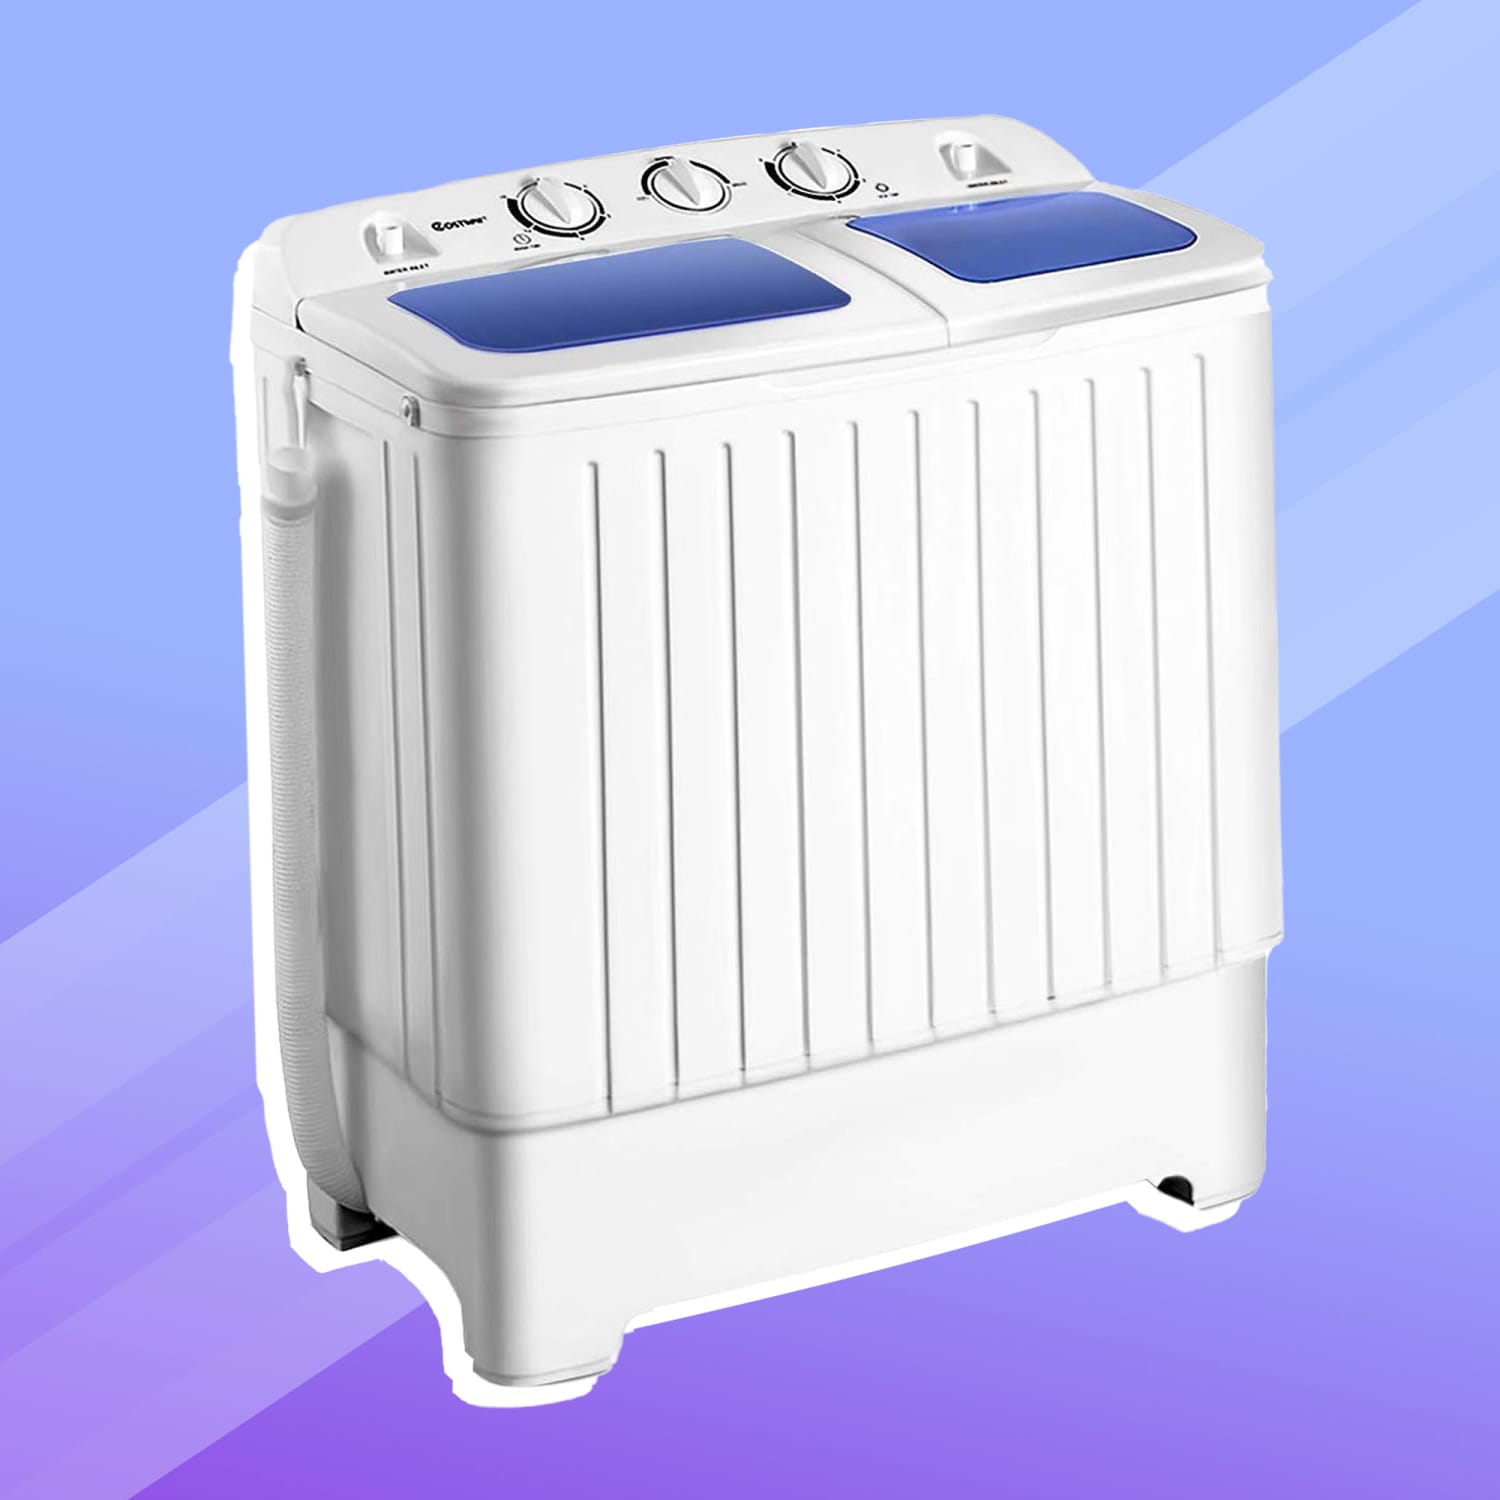 Portable Washing Machine for Apartments, Review